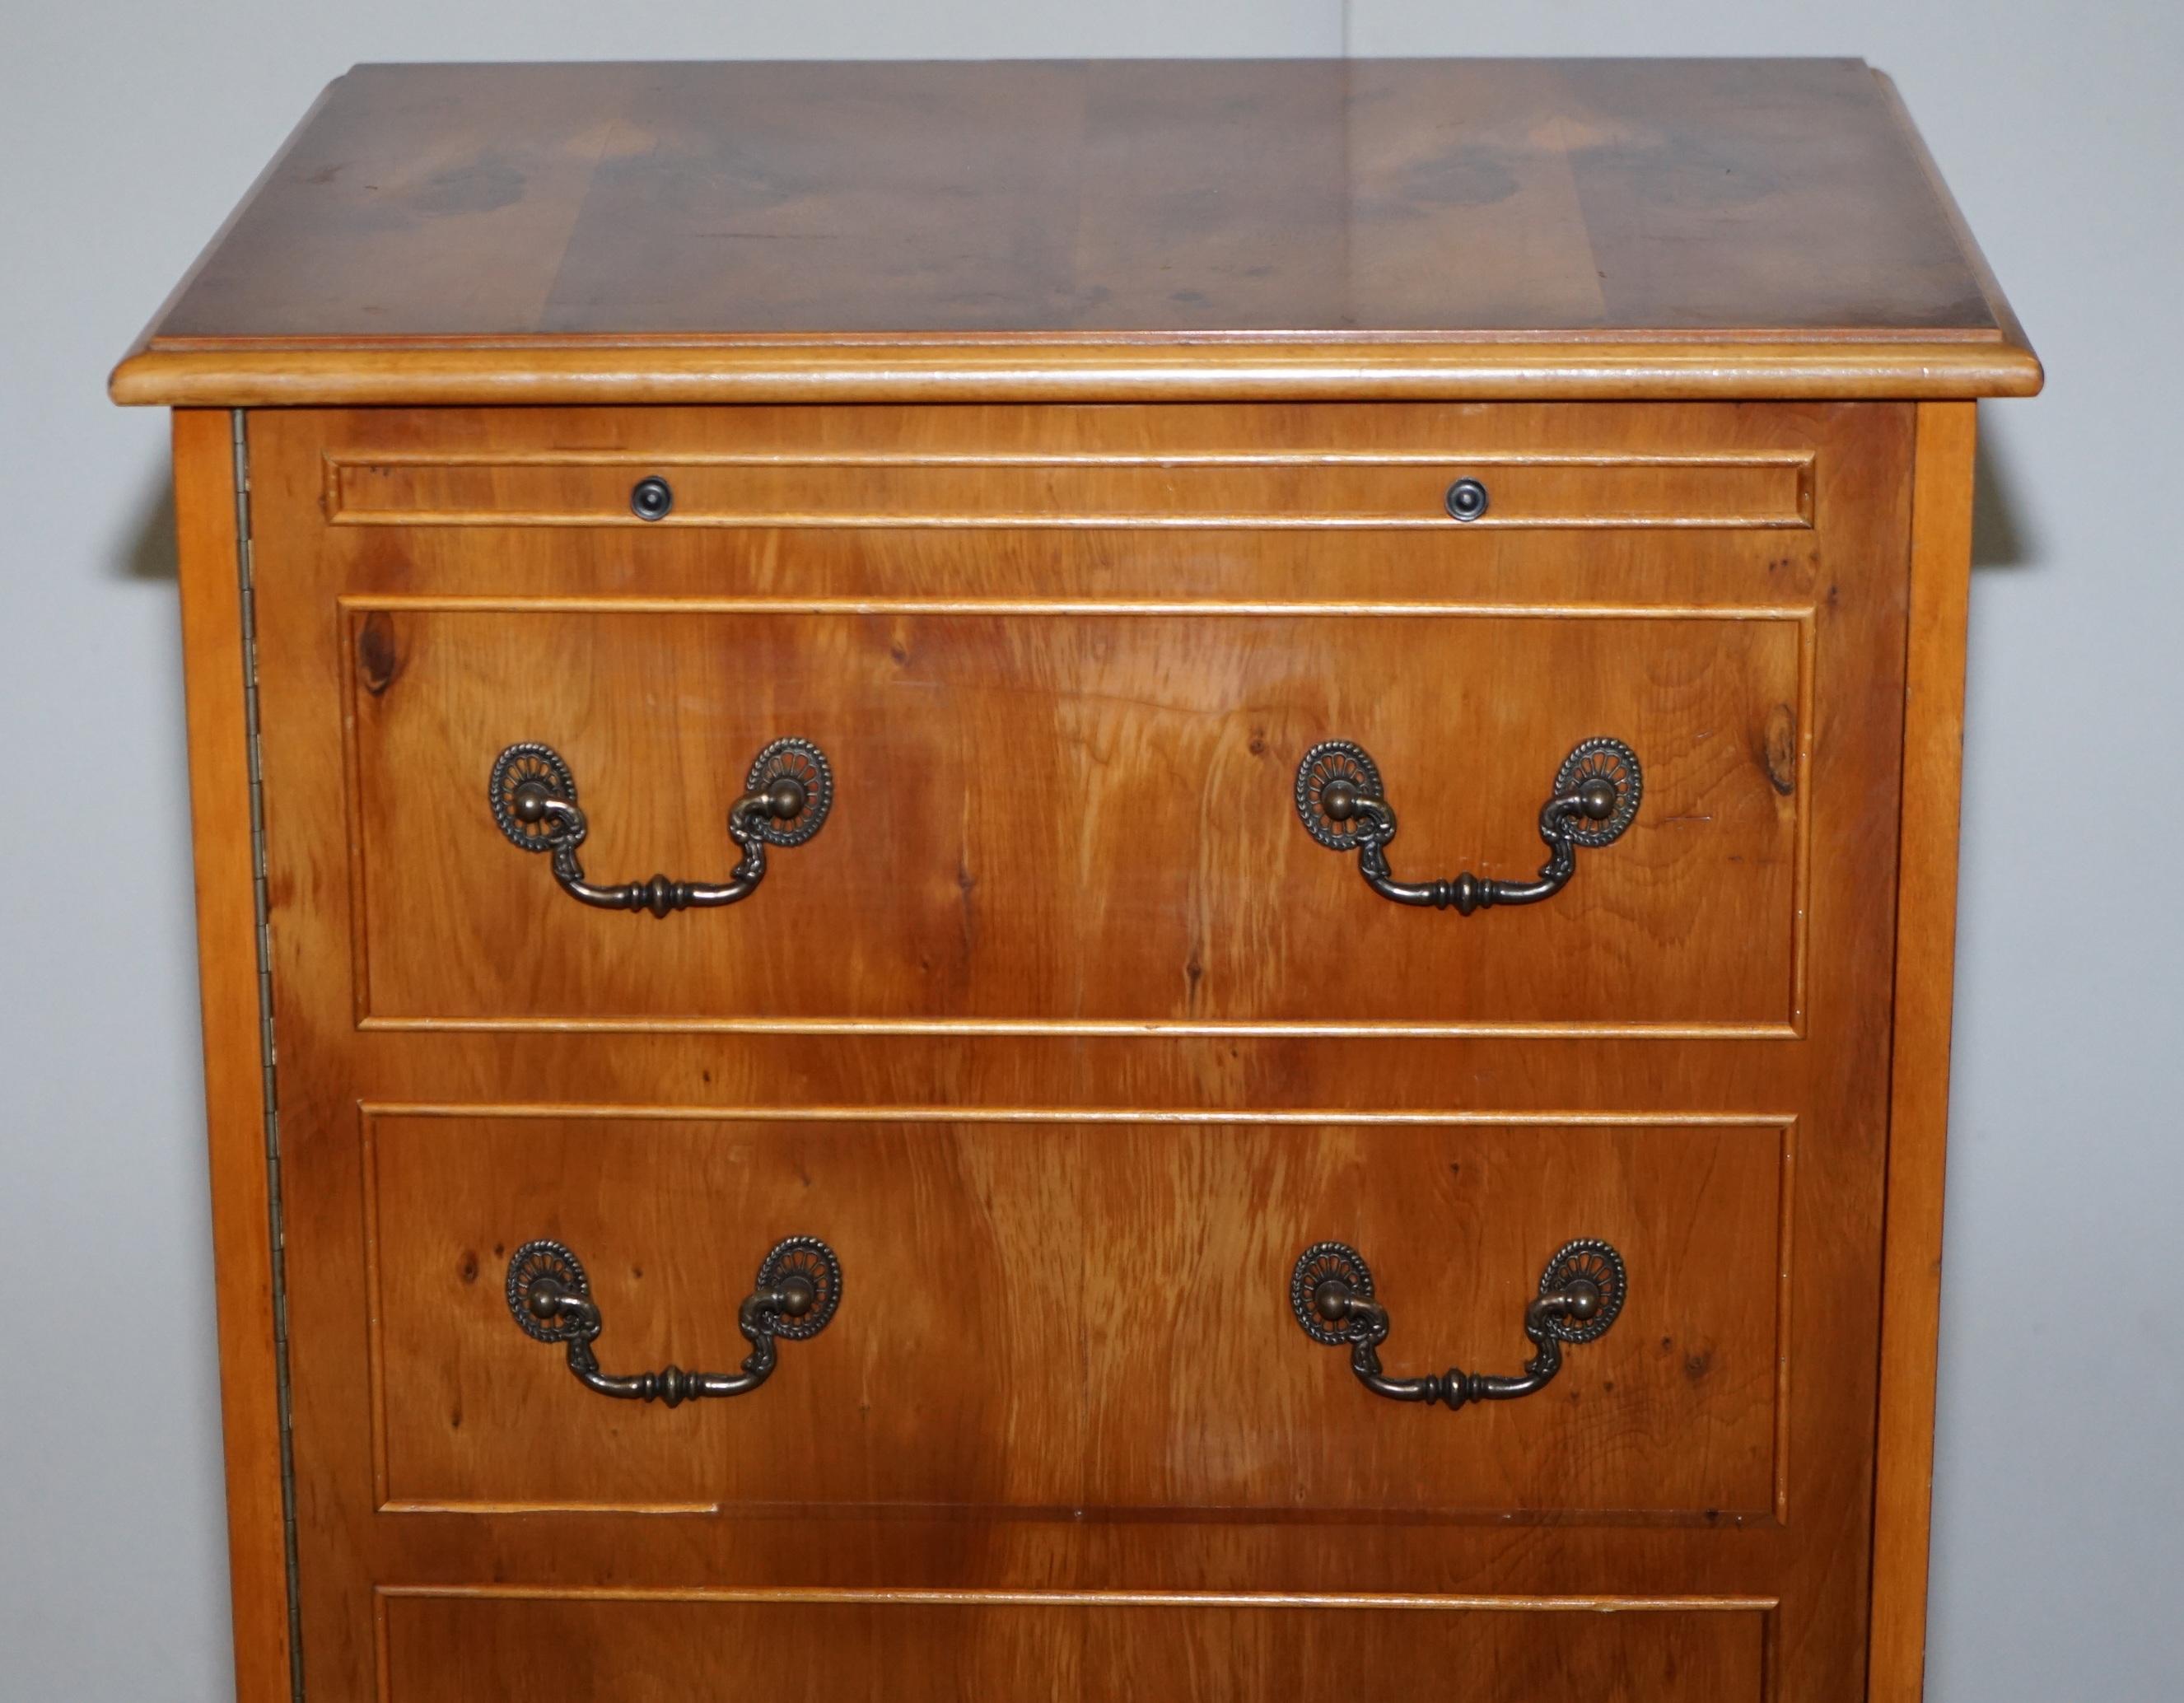 Burr Yew Wood Record Player Cabinet Cupboard Hidden as Regency Chest of Drawers 1